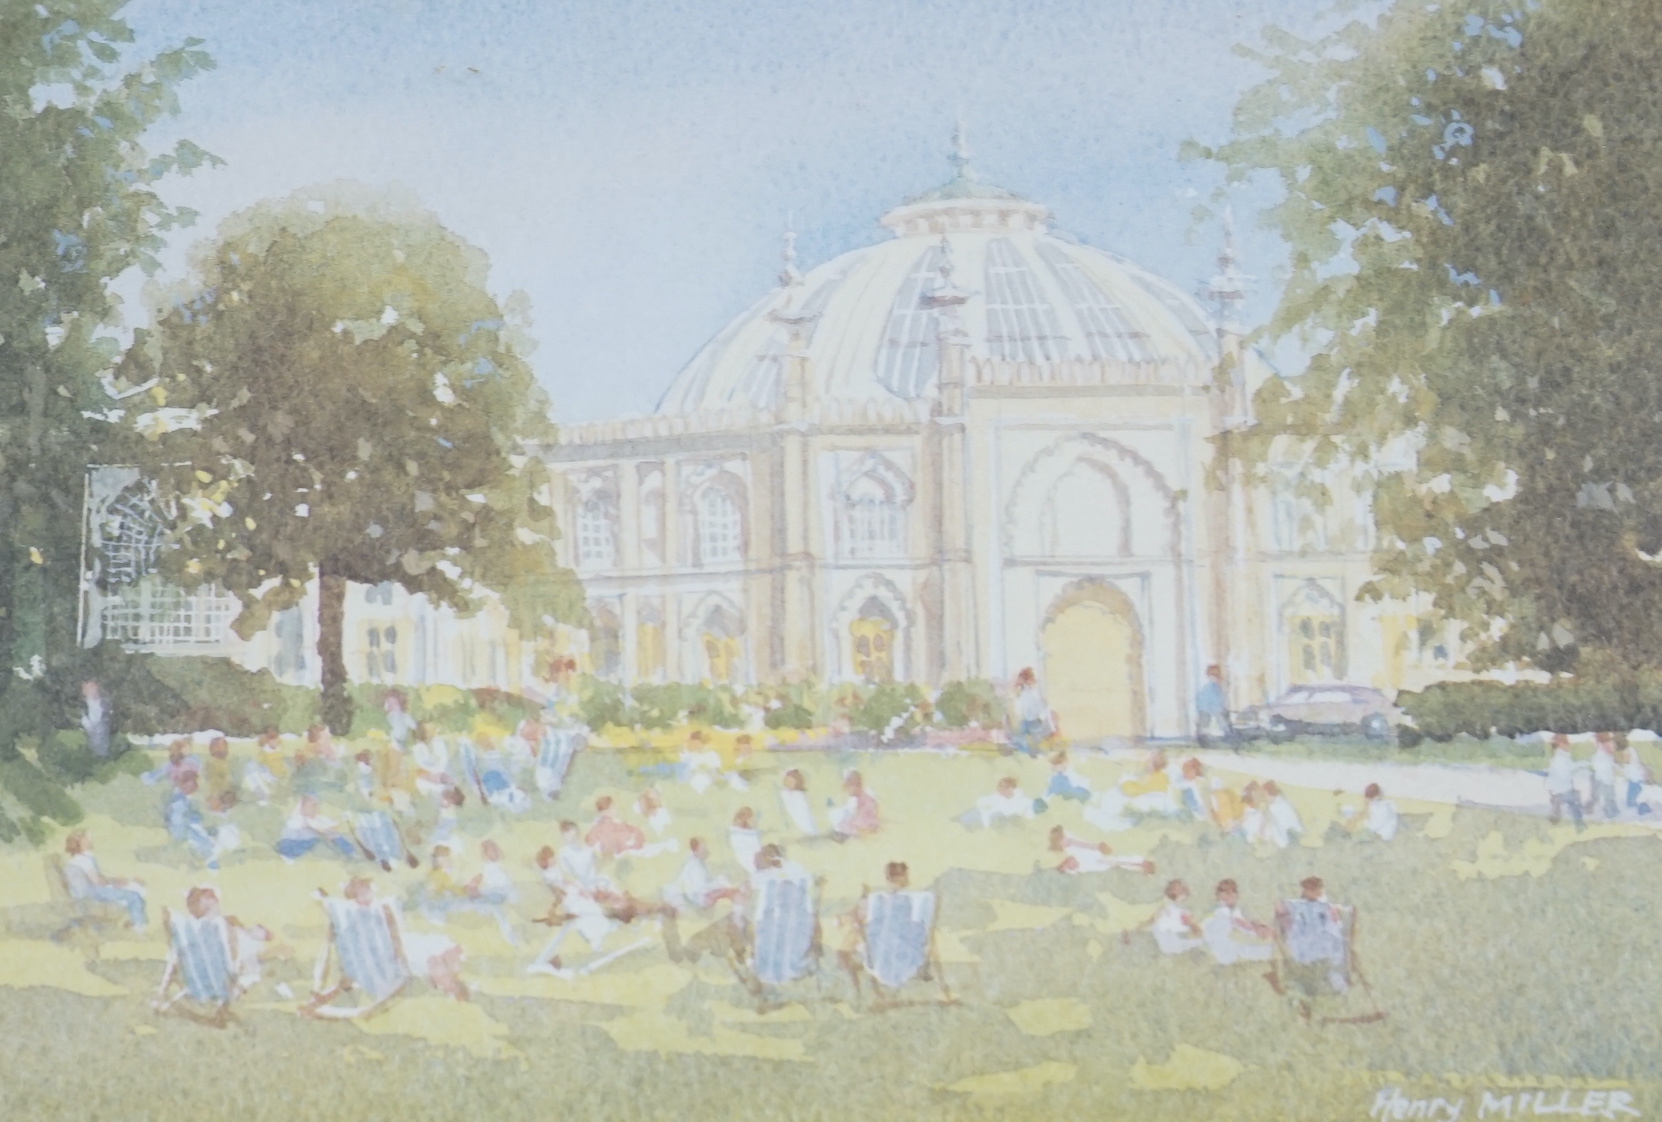 Henry Miller, colour print, The Dome, Brighton, signed in pencil, limited edition 129/850, details verso, 19.5 x 26.5cm